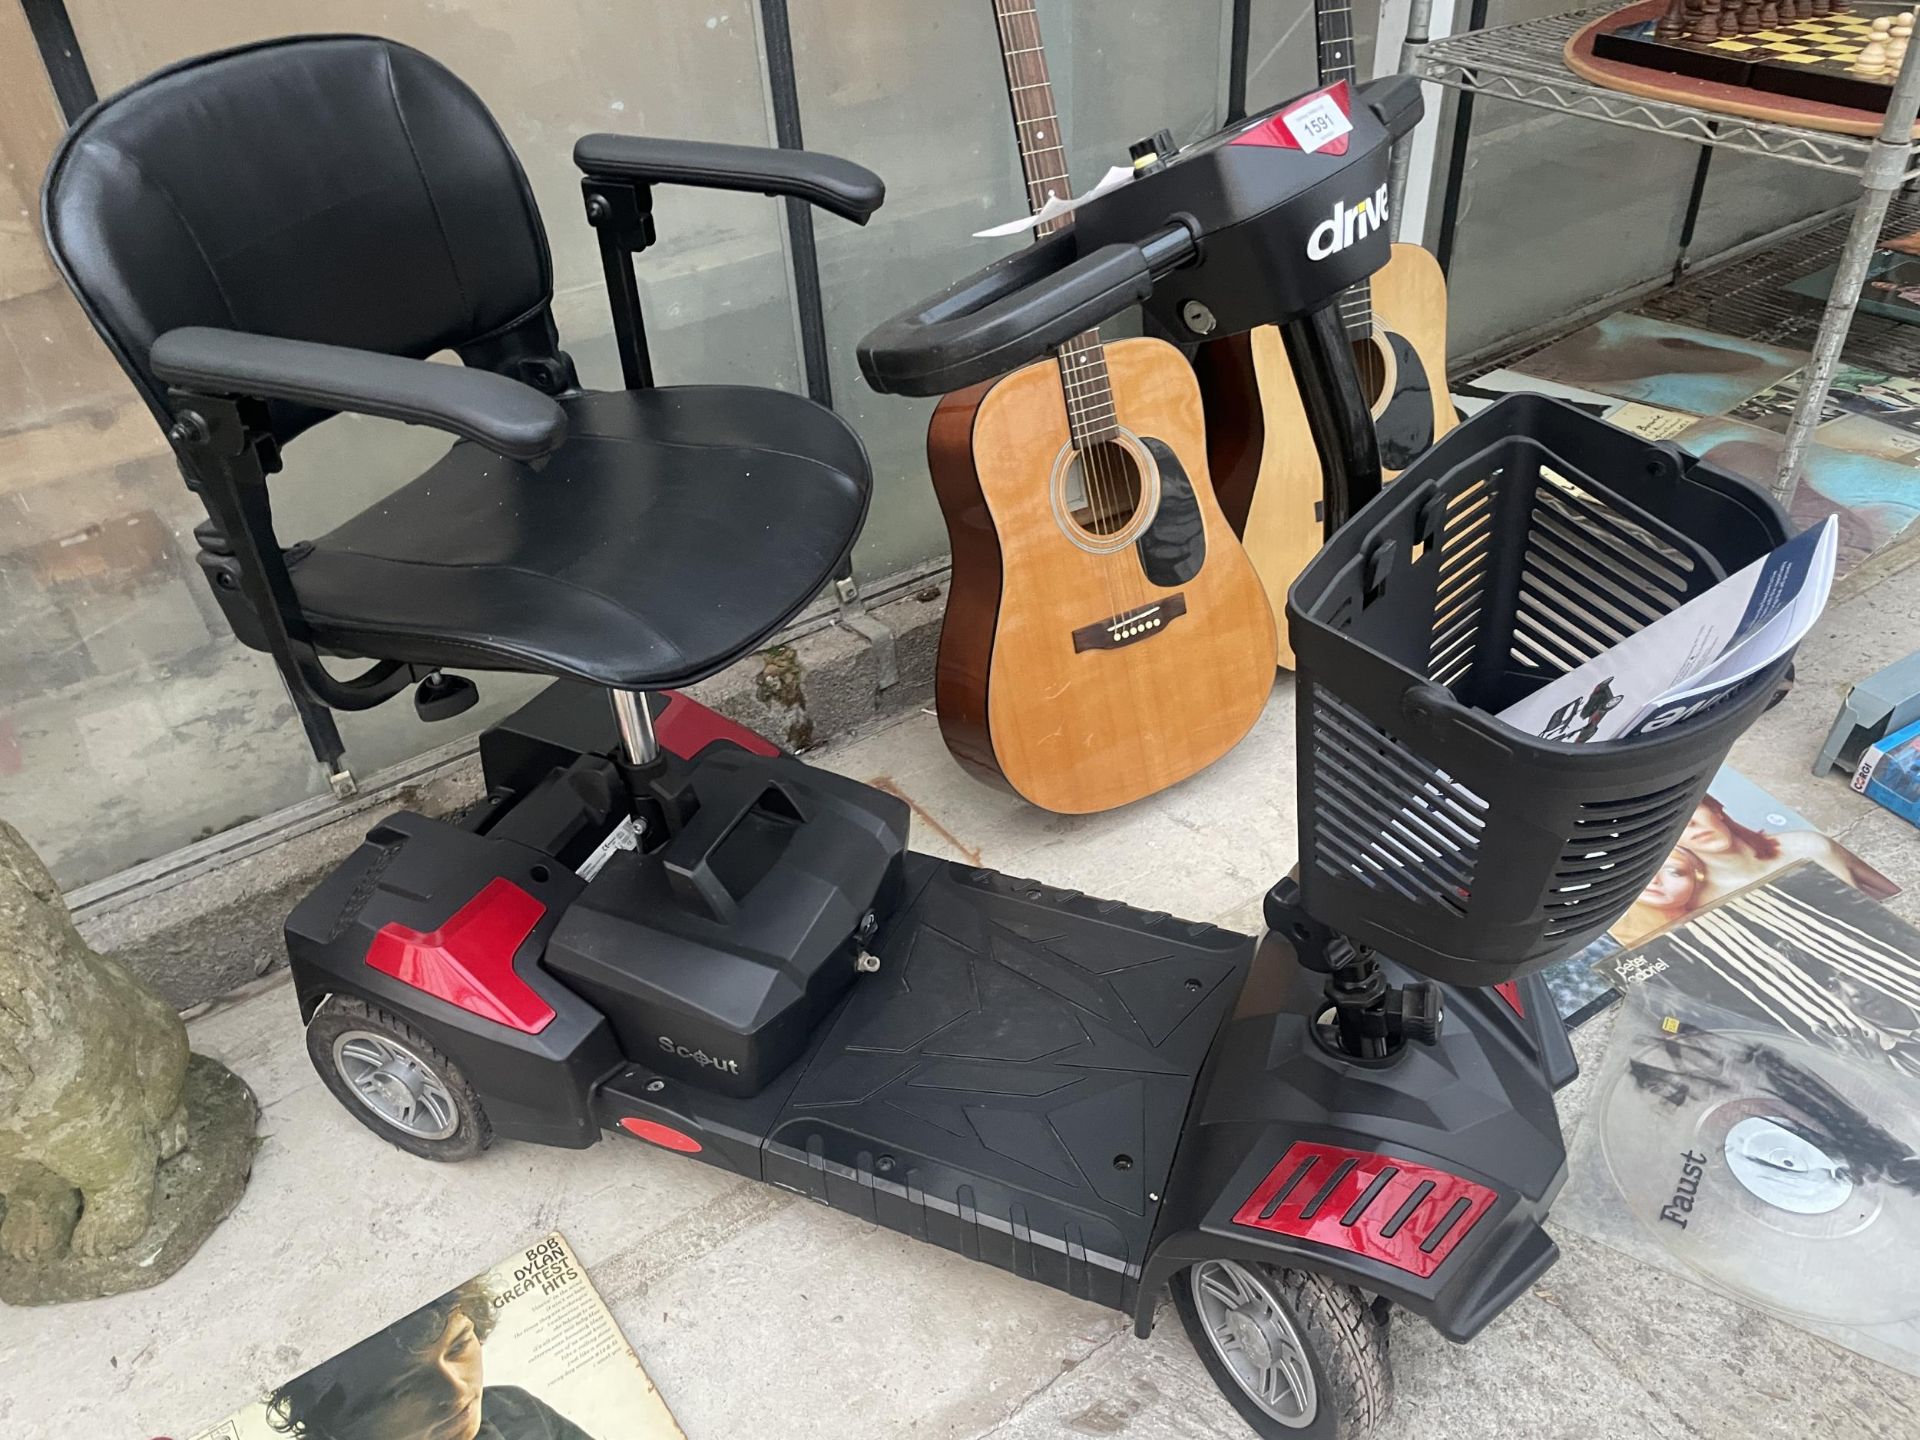 A DRIVE MOBILITY SCOOTER WITH KEY AND CHARGER IN THE OFFICE